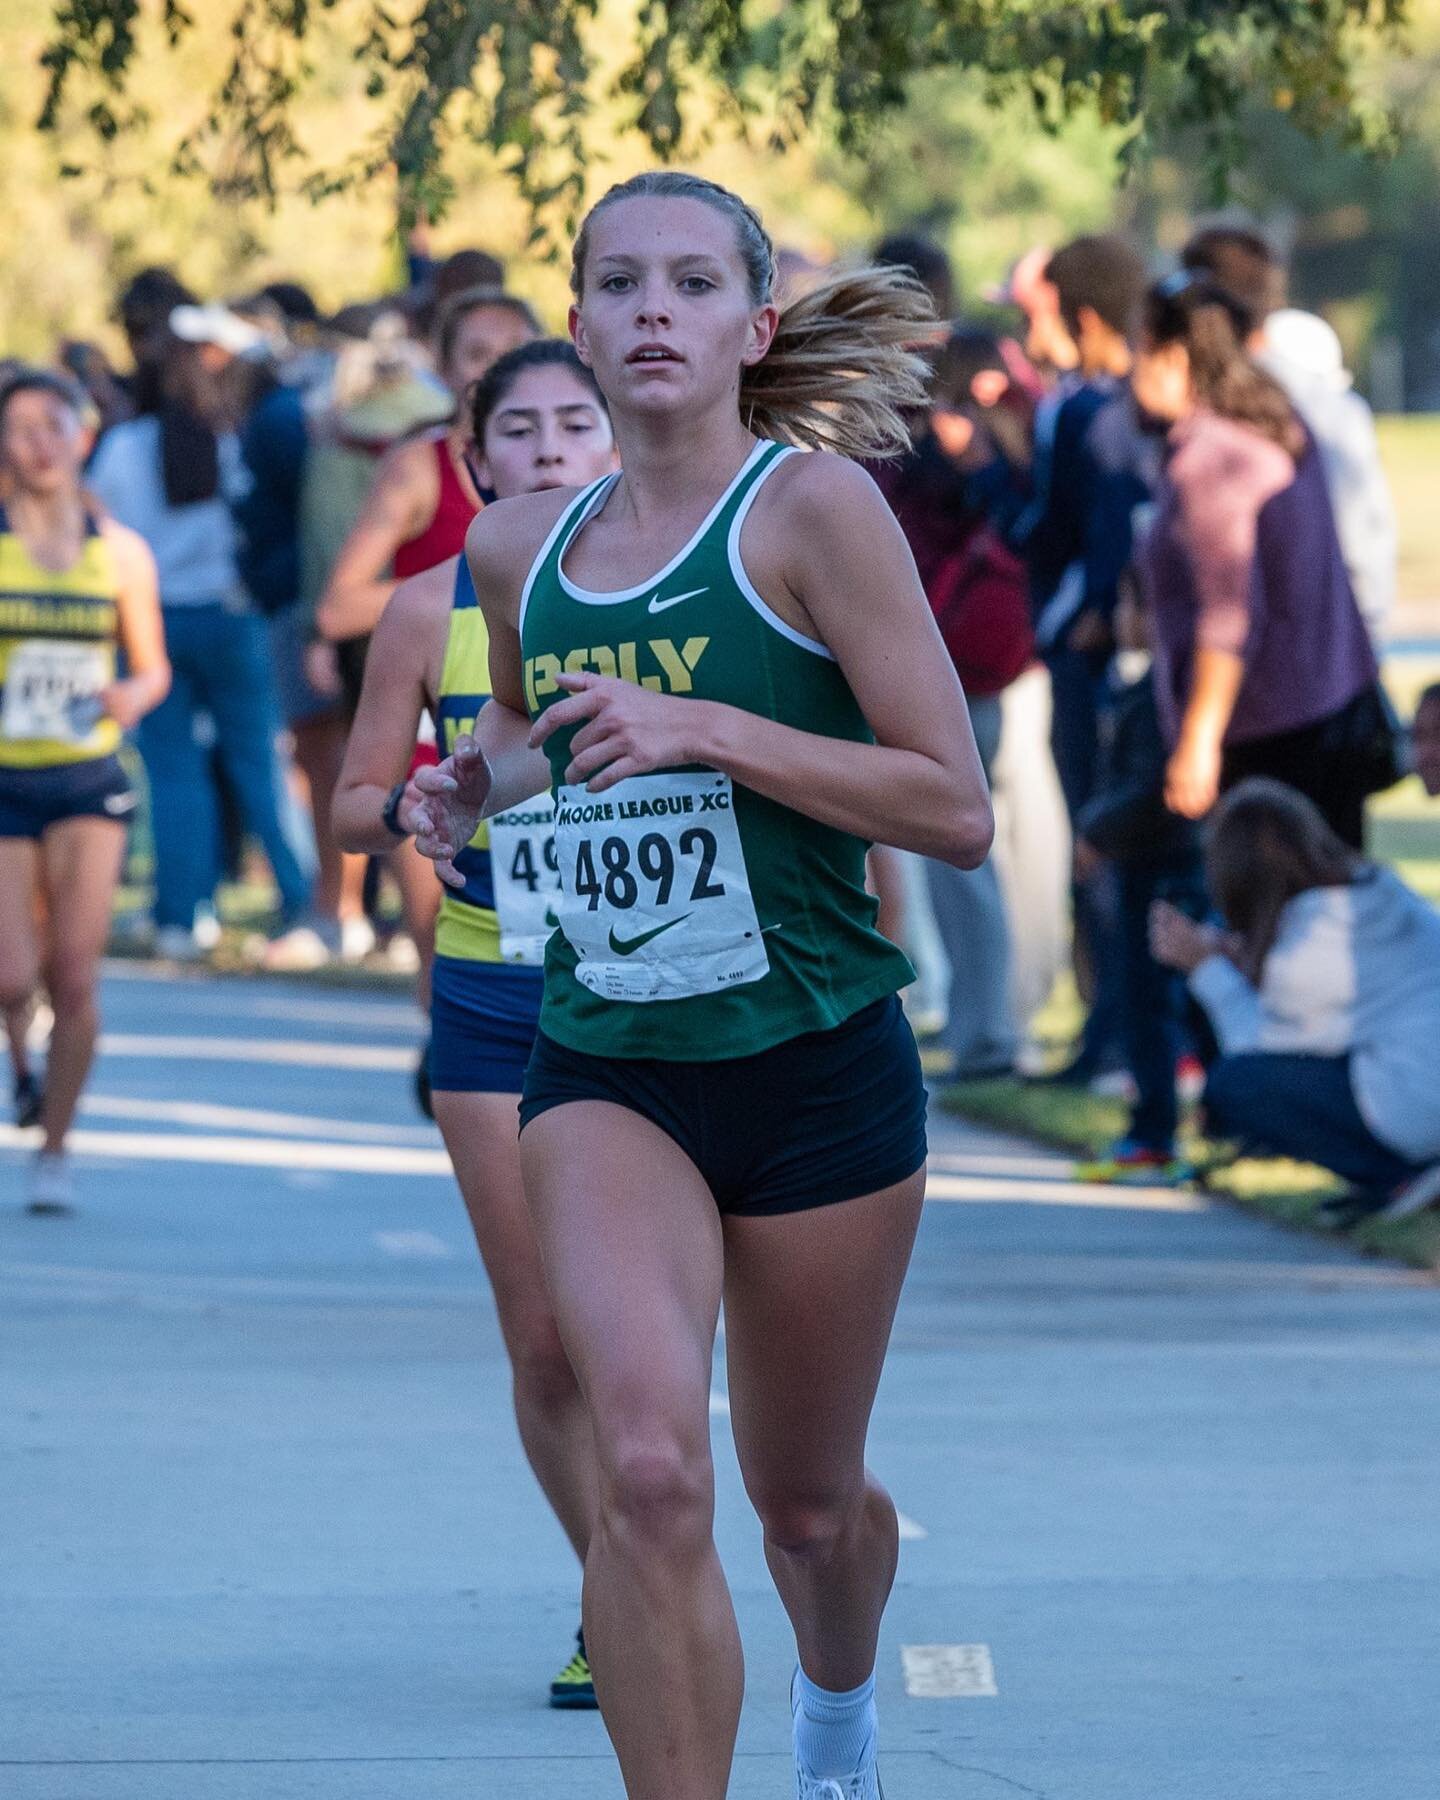 Pace senior Camille Lindsay had been sidleined for much of the 2022 Girls XC season due to injury, and had come down with the flu prior to this race. 

That didn&rsquo;t stop her from finishing second in the Moore Leauge finals with a time of 19:13. 